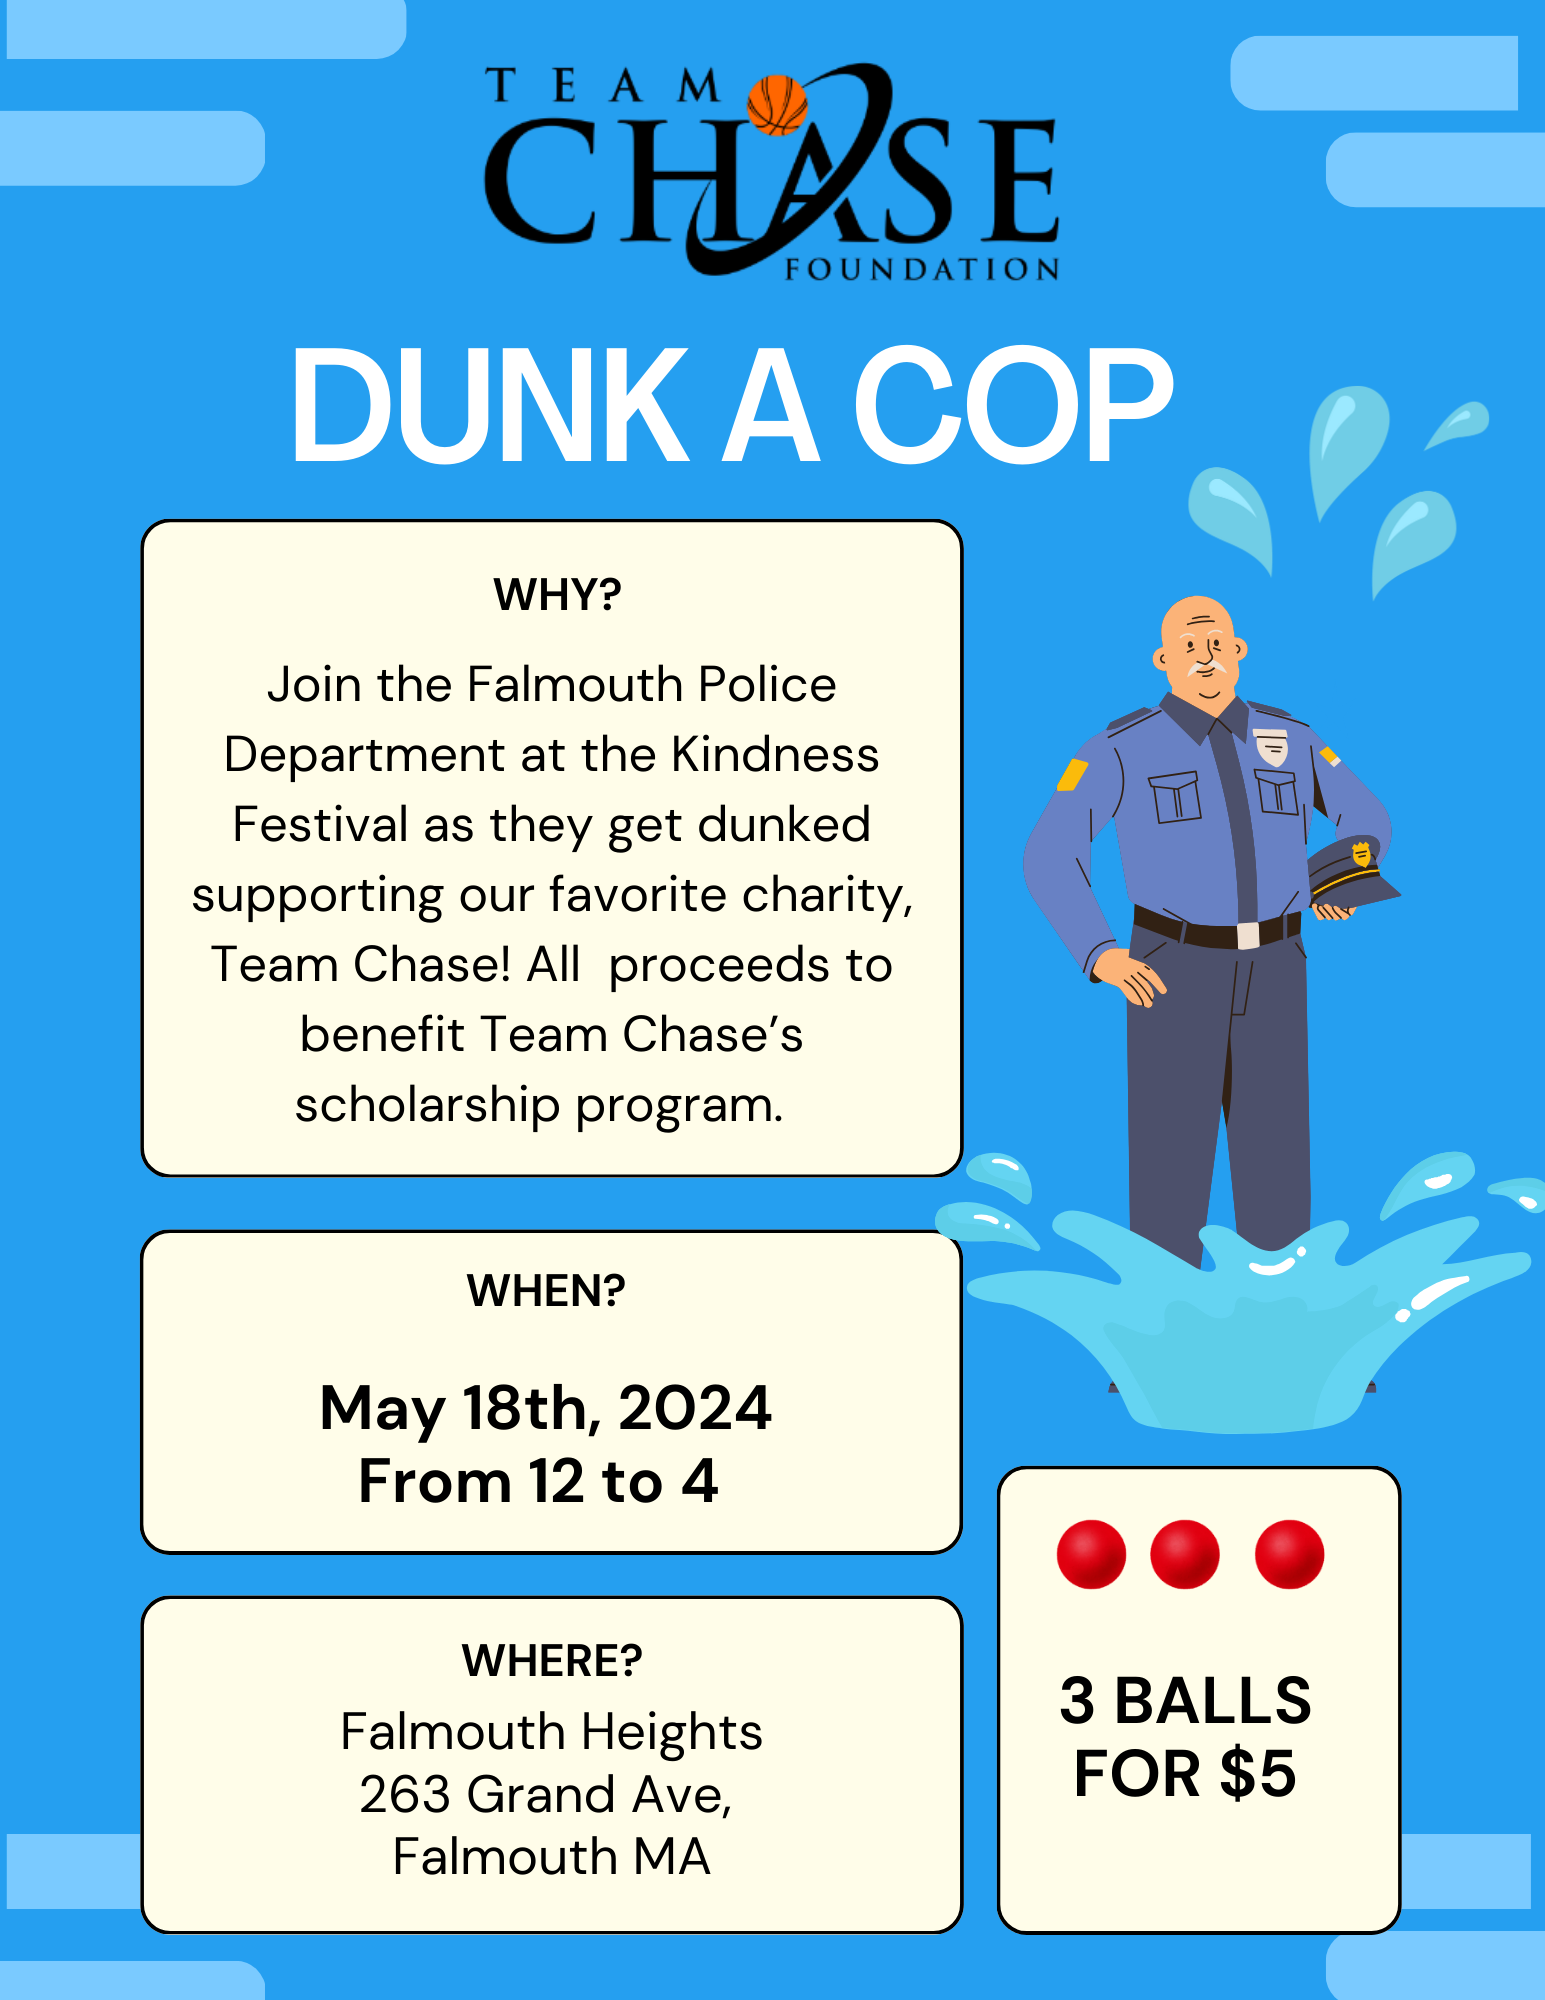 Dunk a Cop for Team Chase Foundation Kindness